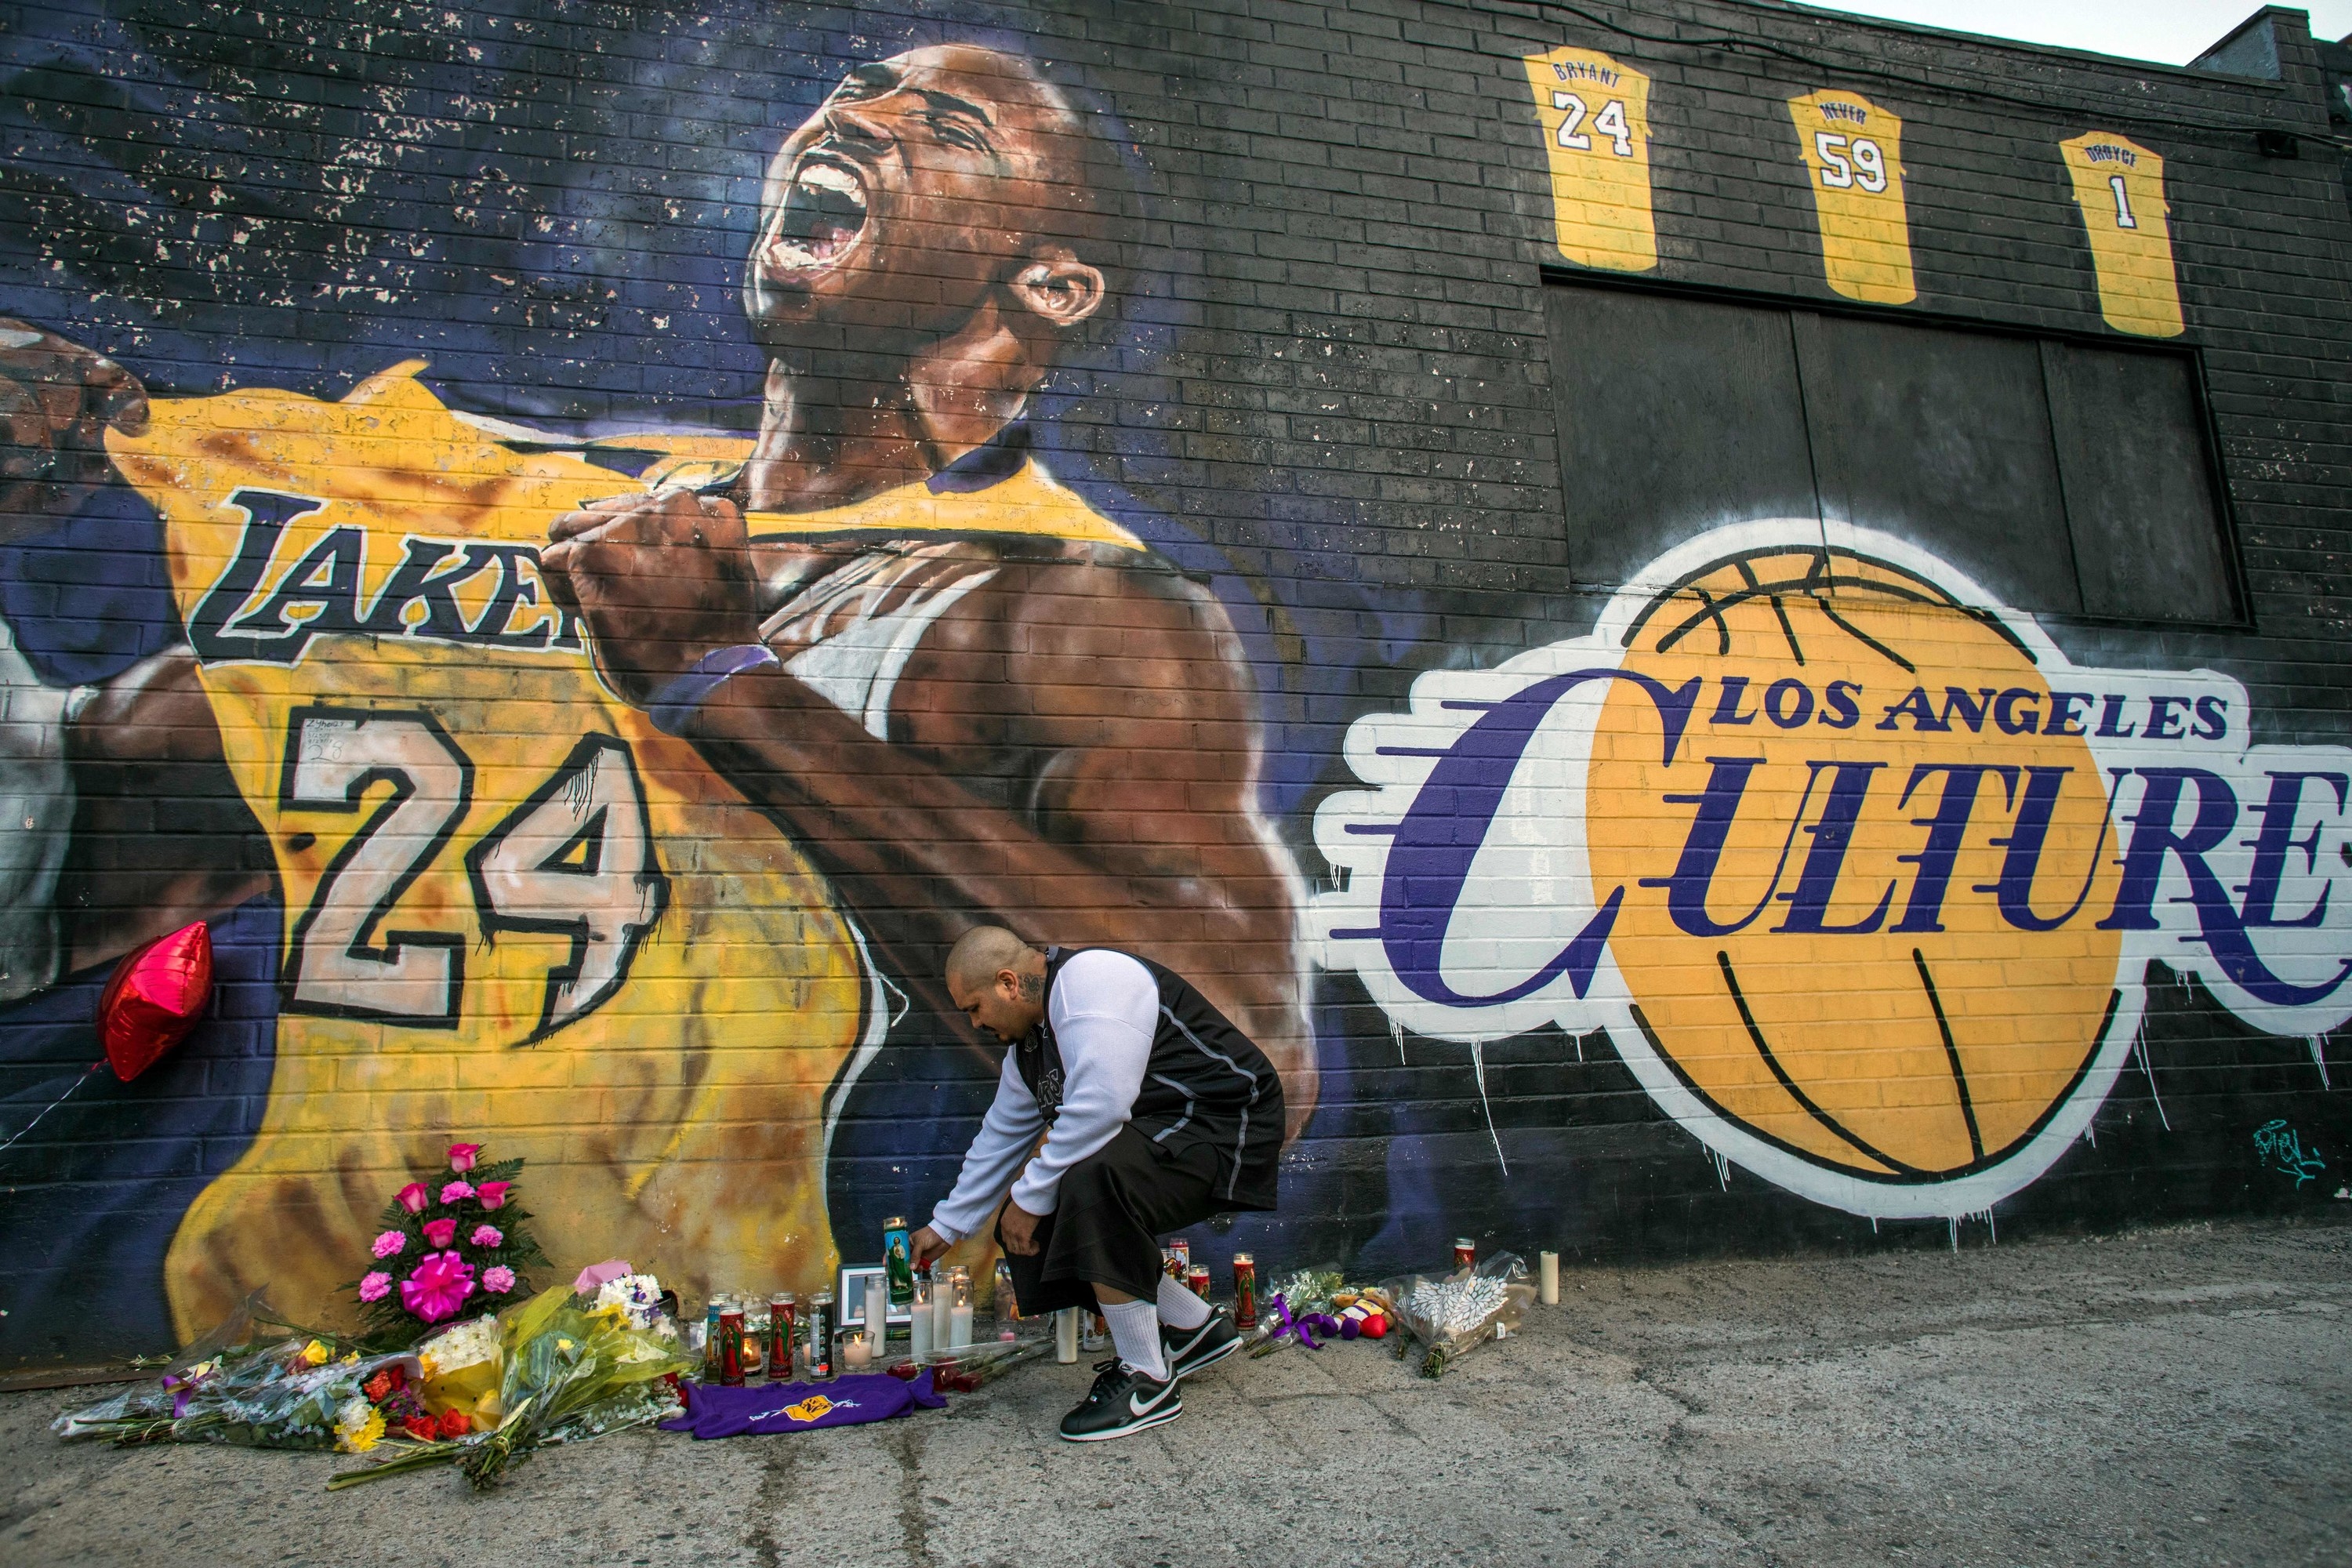 Luis Villanueva lights a candle in front of a Kobe Bryant mural in which he holds up his number 24 jersey beside the words &quot;los angeles culture&quot; written in the font of the Lakers basketball team